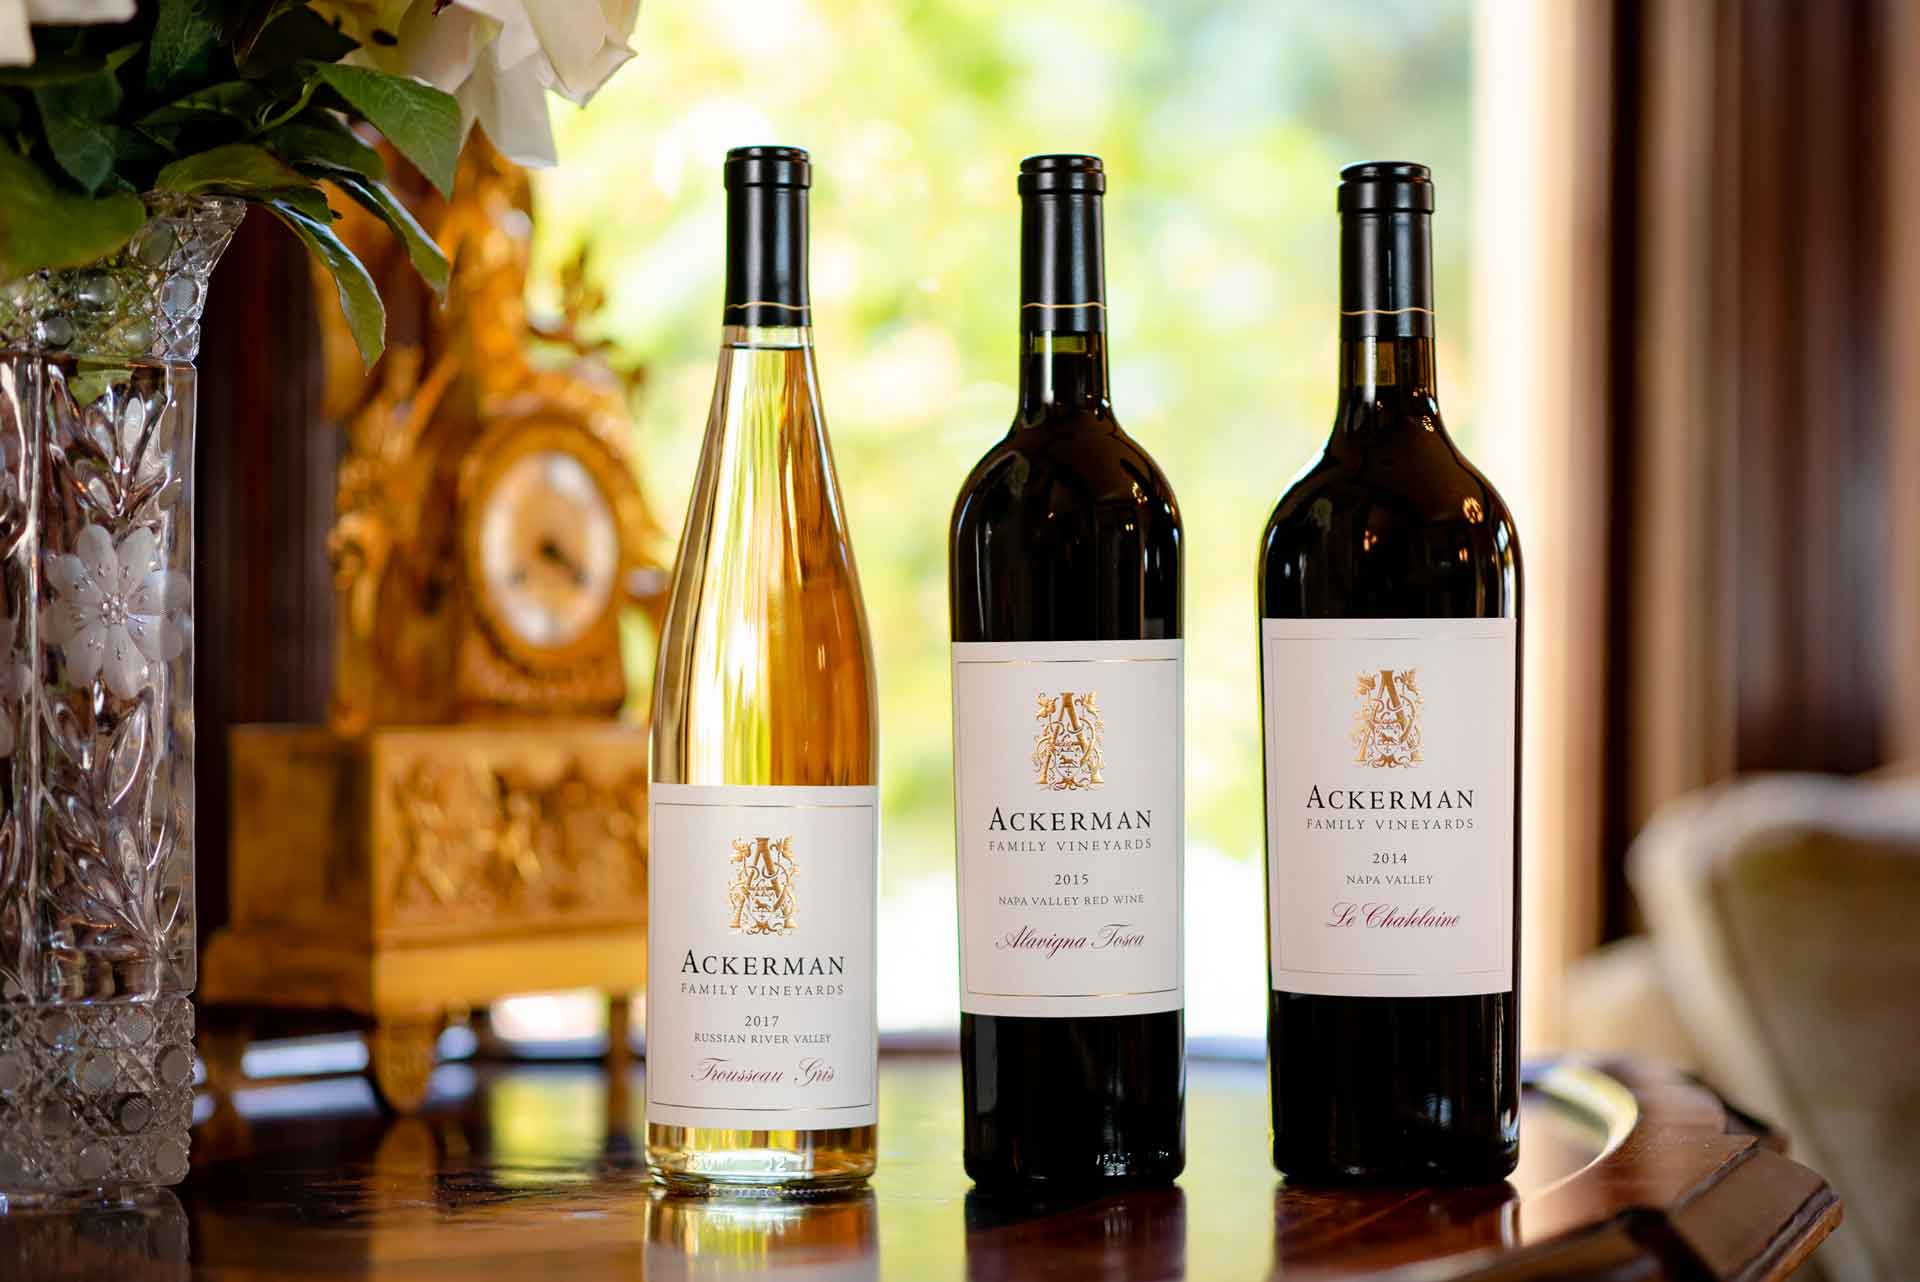 Trio of Ackerman wines beside a gold clock